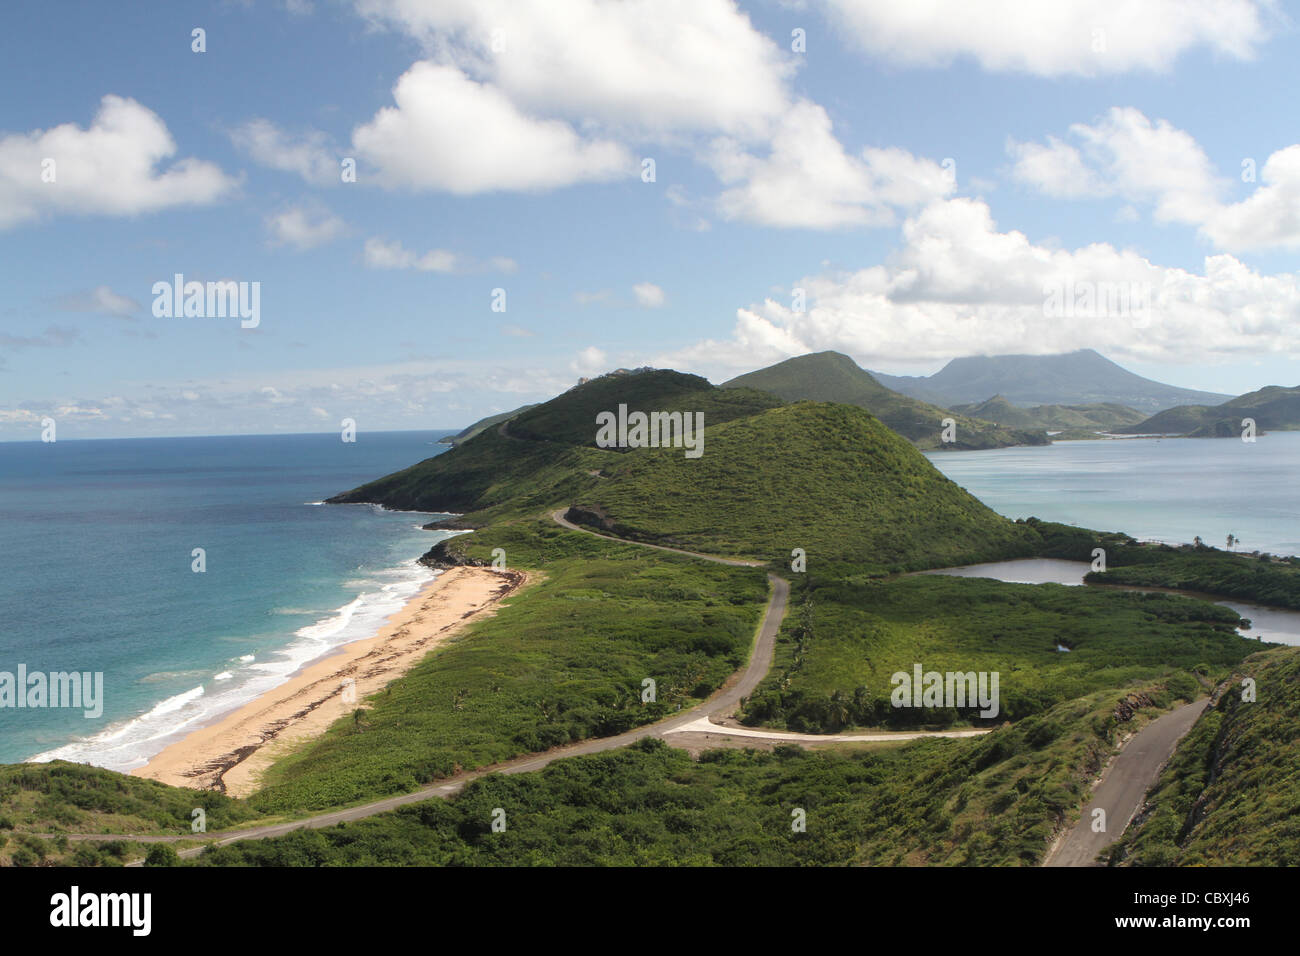 St Kitts with Nevis in the distance showing Atlantic and Caribbean Oceans Stock Photo